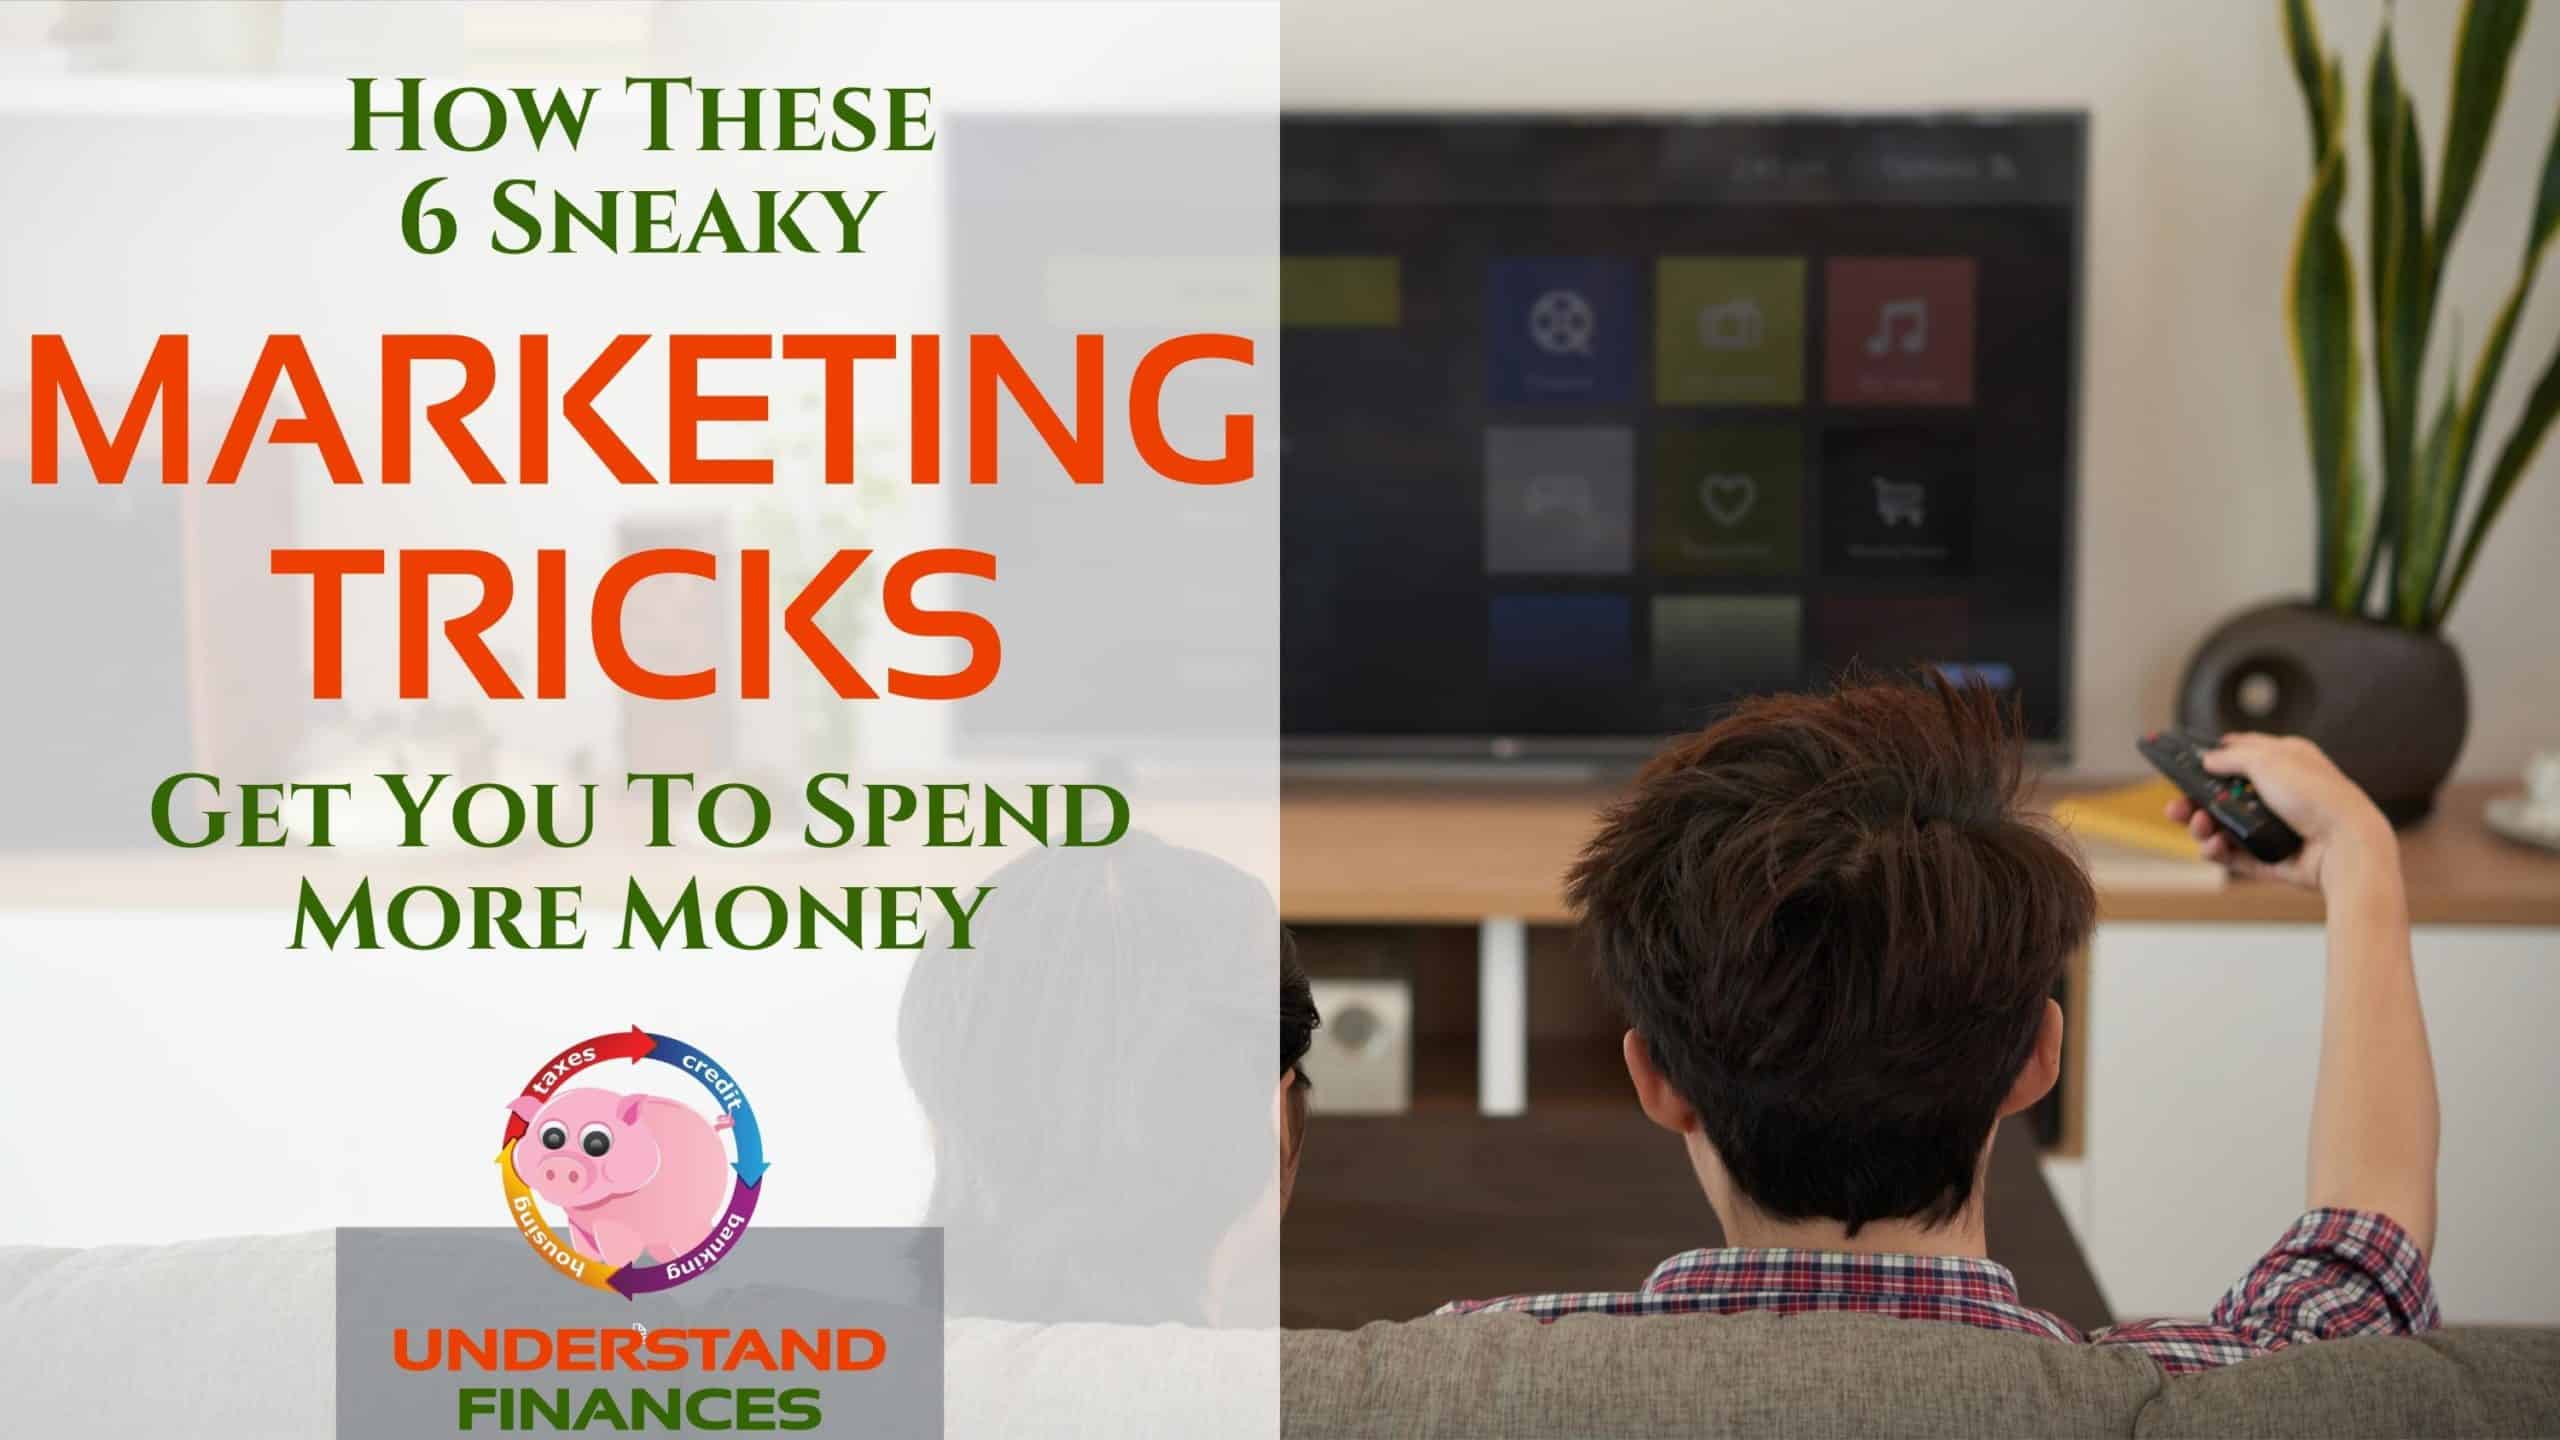 How These 6 Sneaky Marketing Tricks Get You to Spend More Money